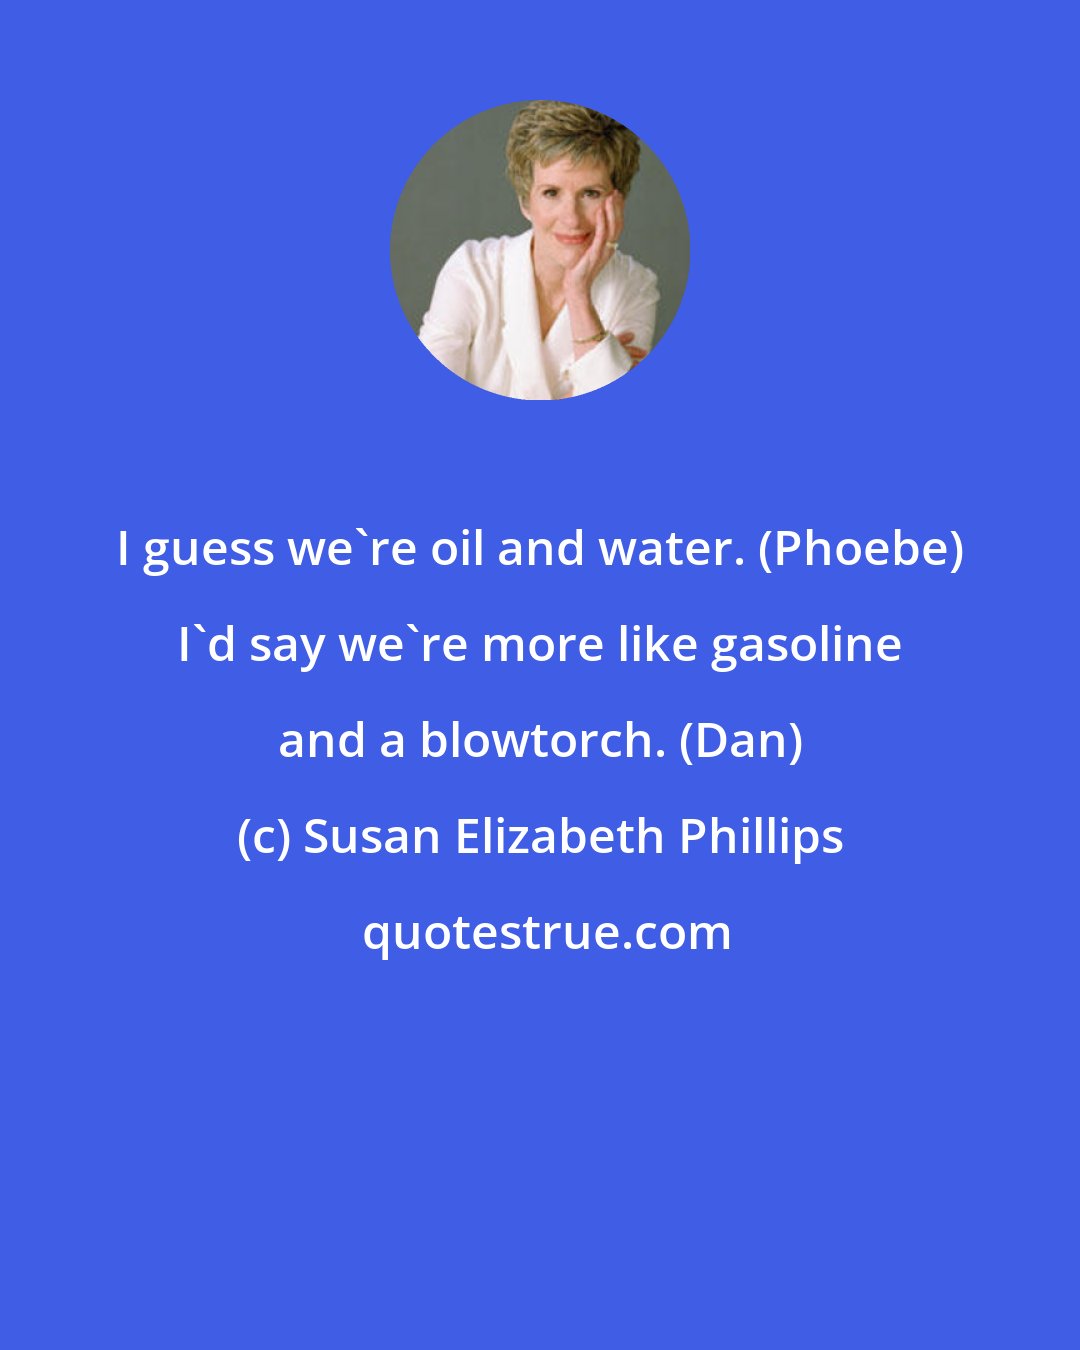 Susan Elizabeth Phillips: I guess we're oil and water. (Phoebe) I'd say we're more like gasoline and a blowtorch. (Dan)